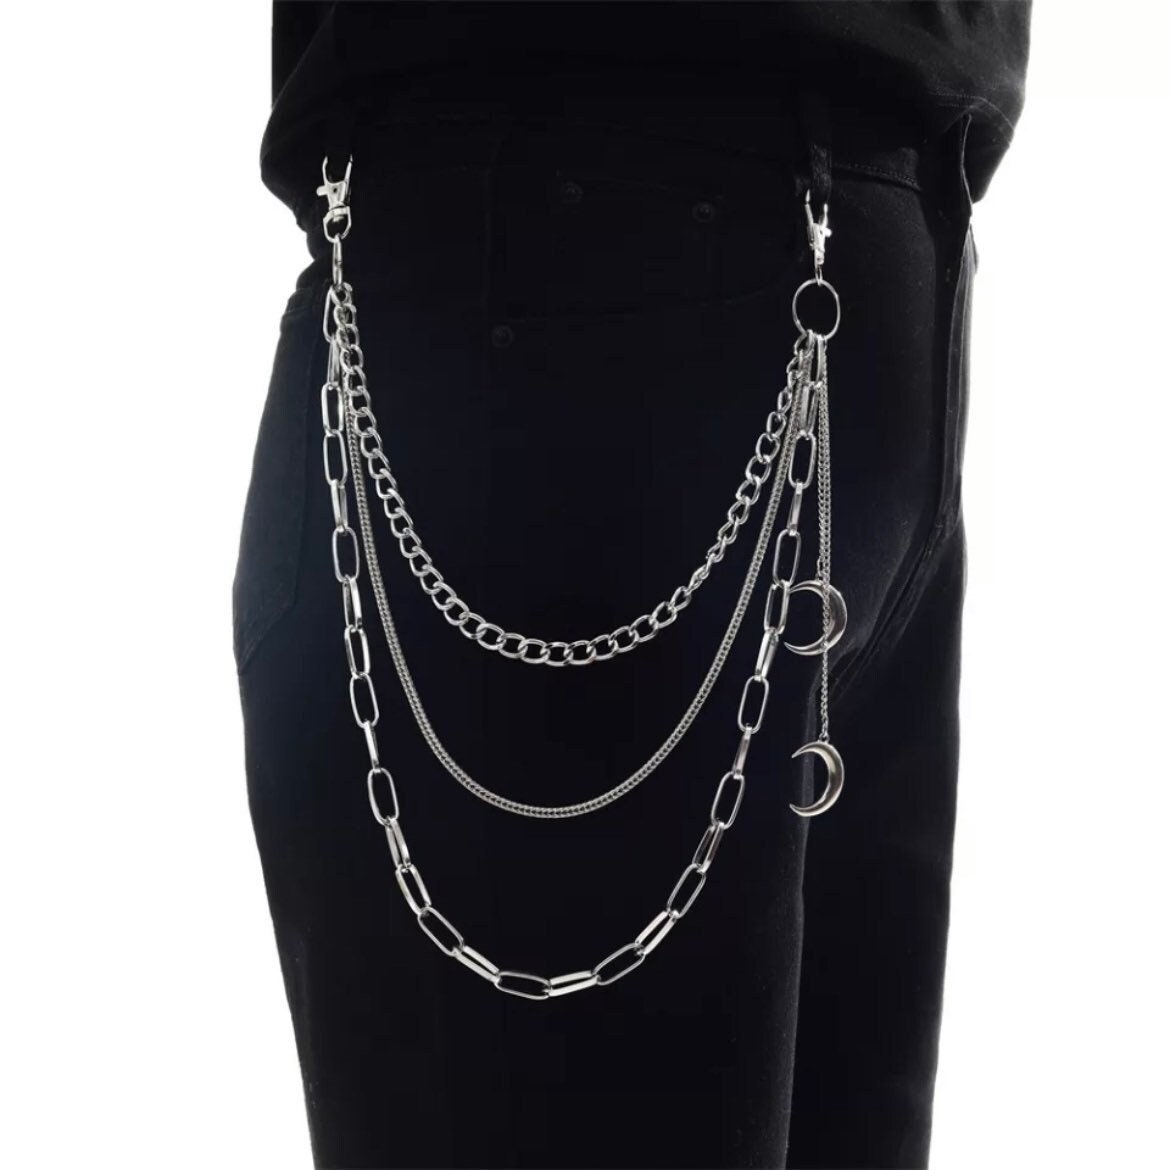 Chunky Pant Chains, Black Acrylic Side Waist Chains for Wallet